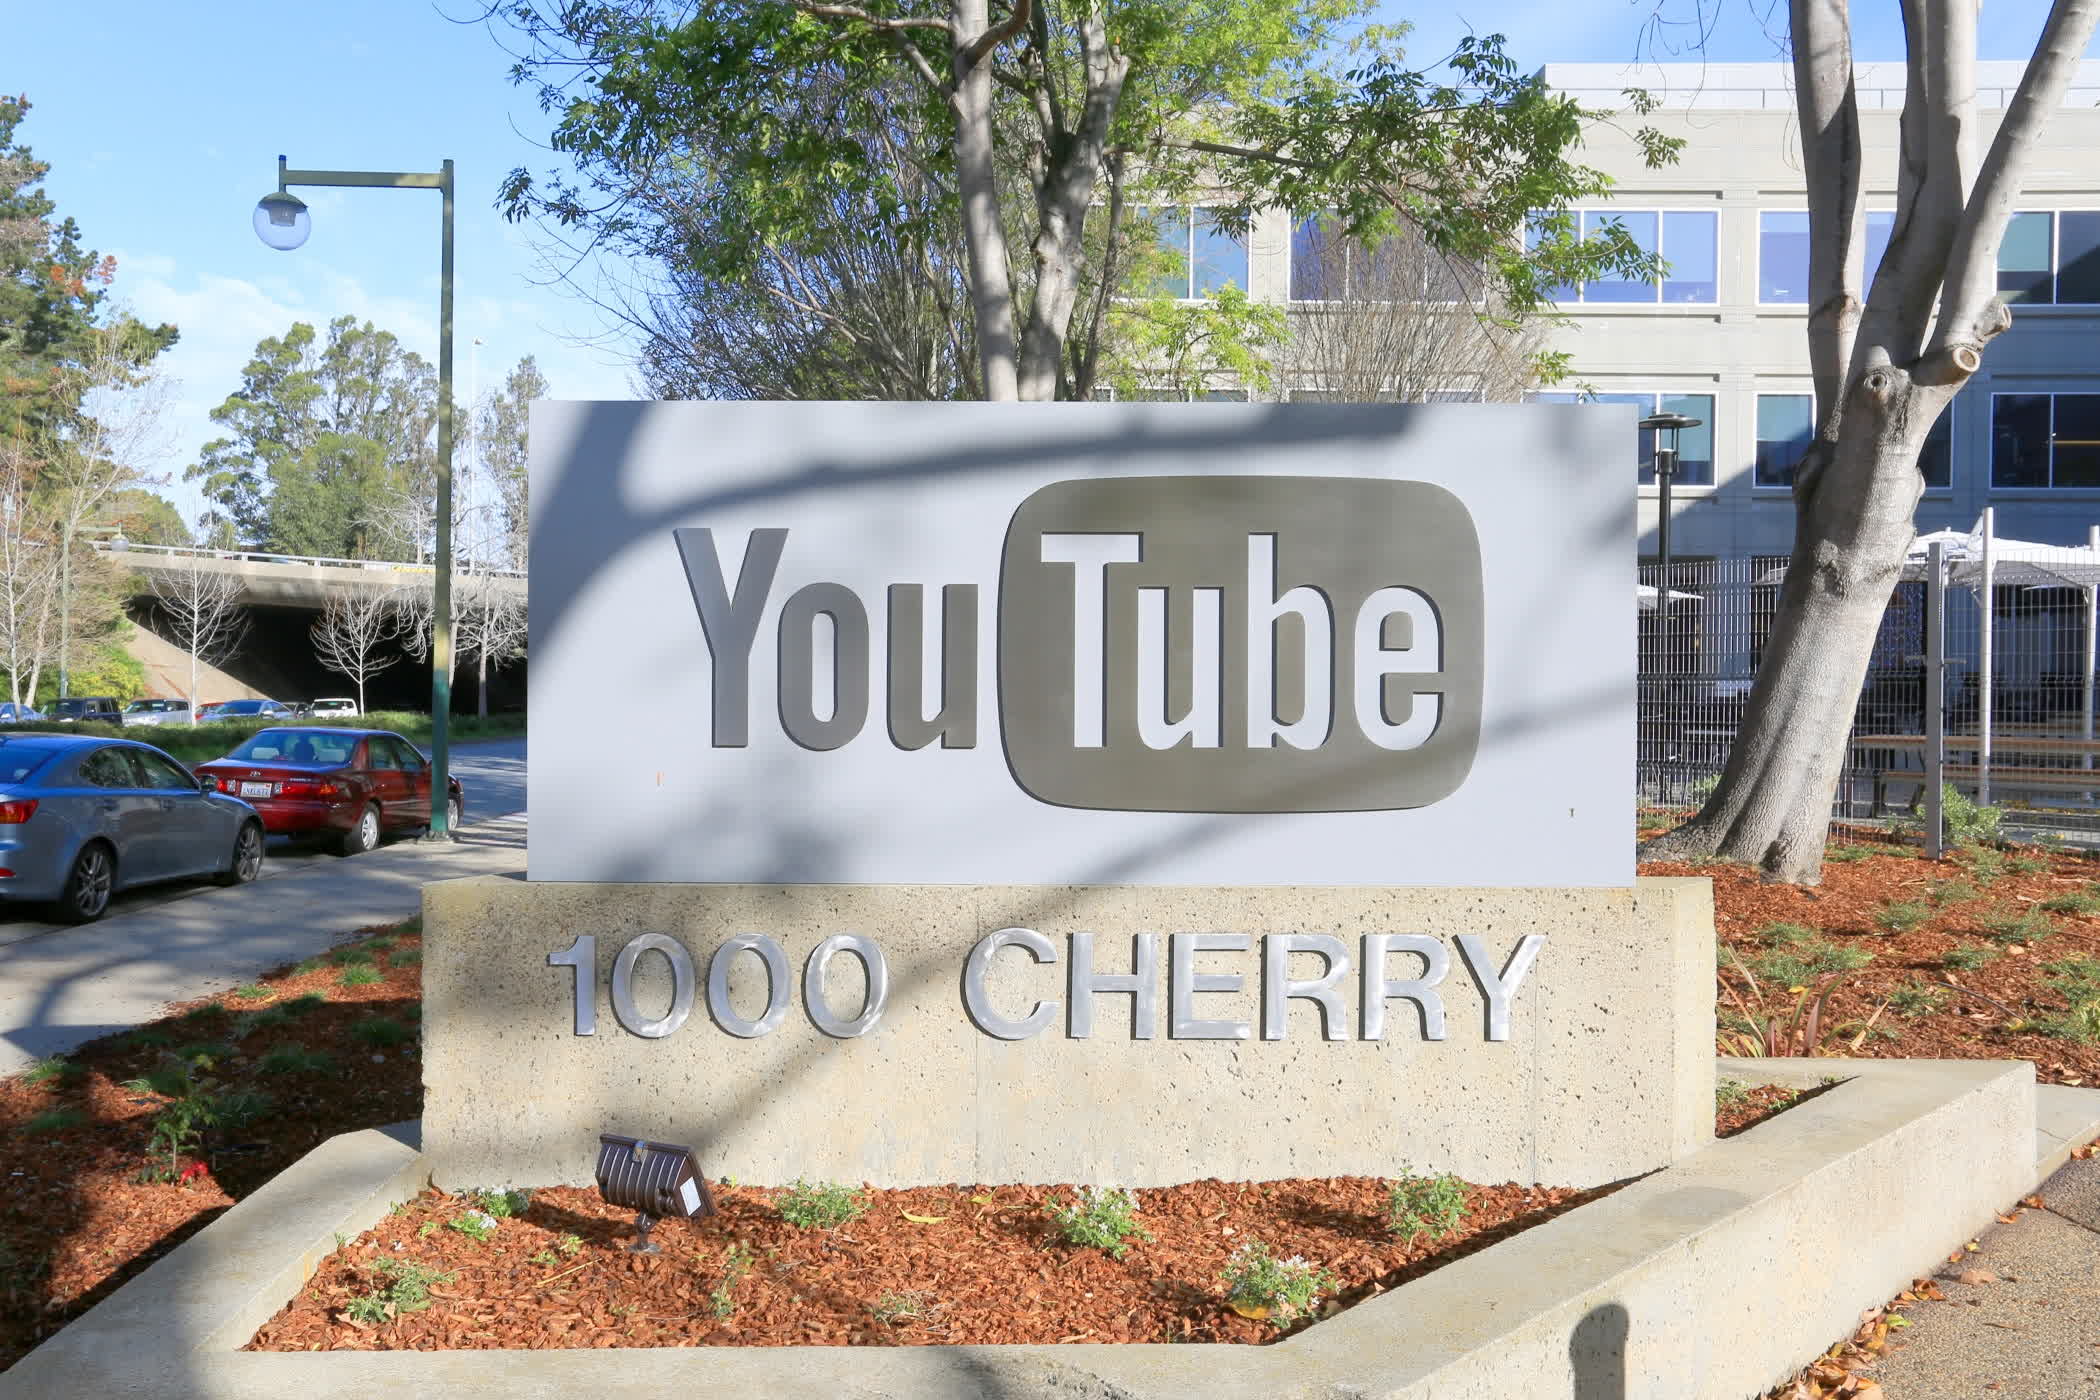 YouTube is experimenting with a Premium 1080p streaming option for subscribers